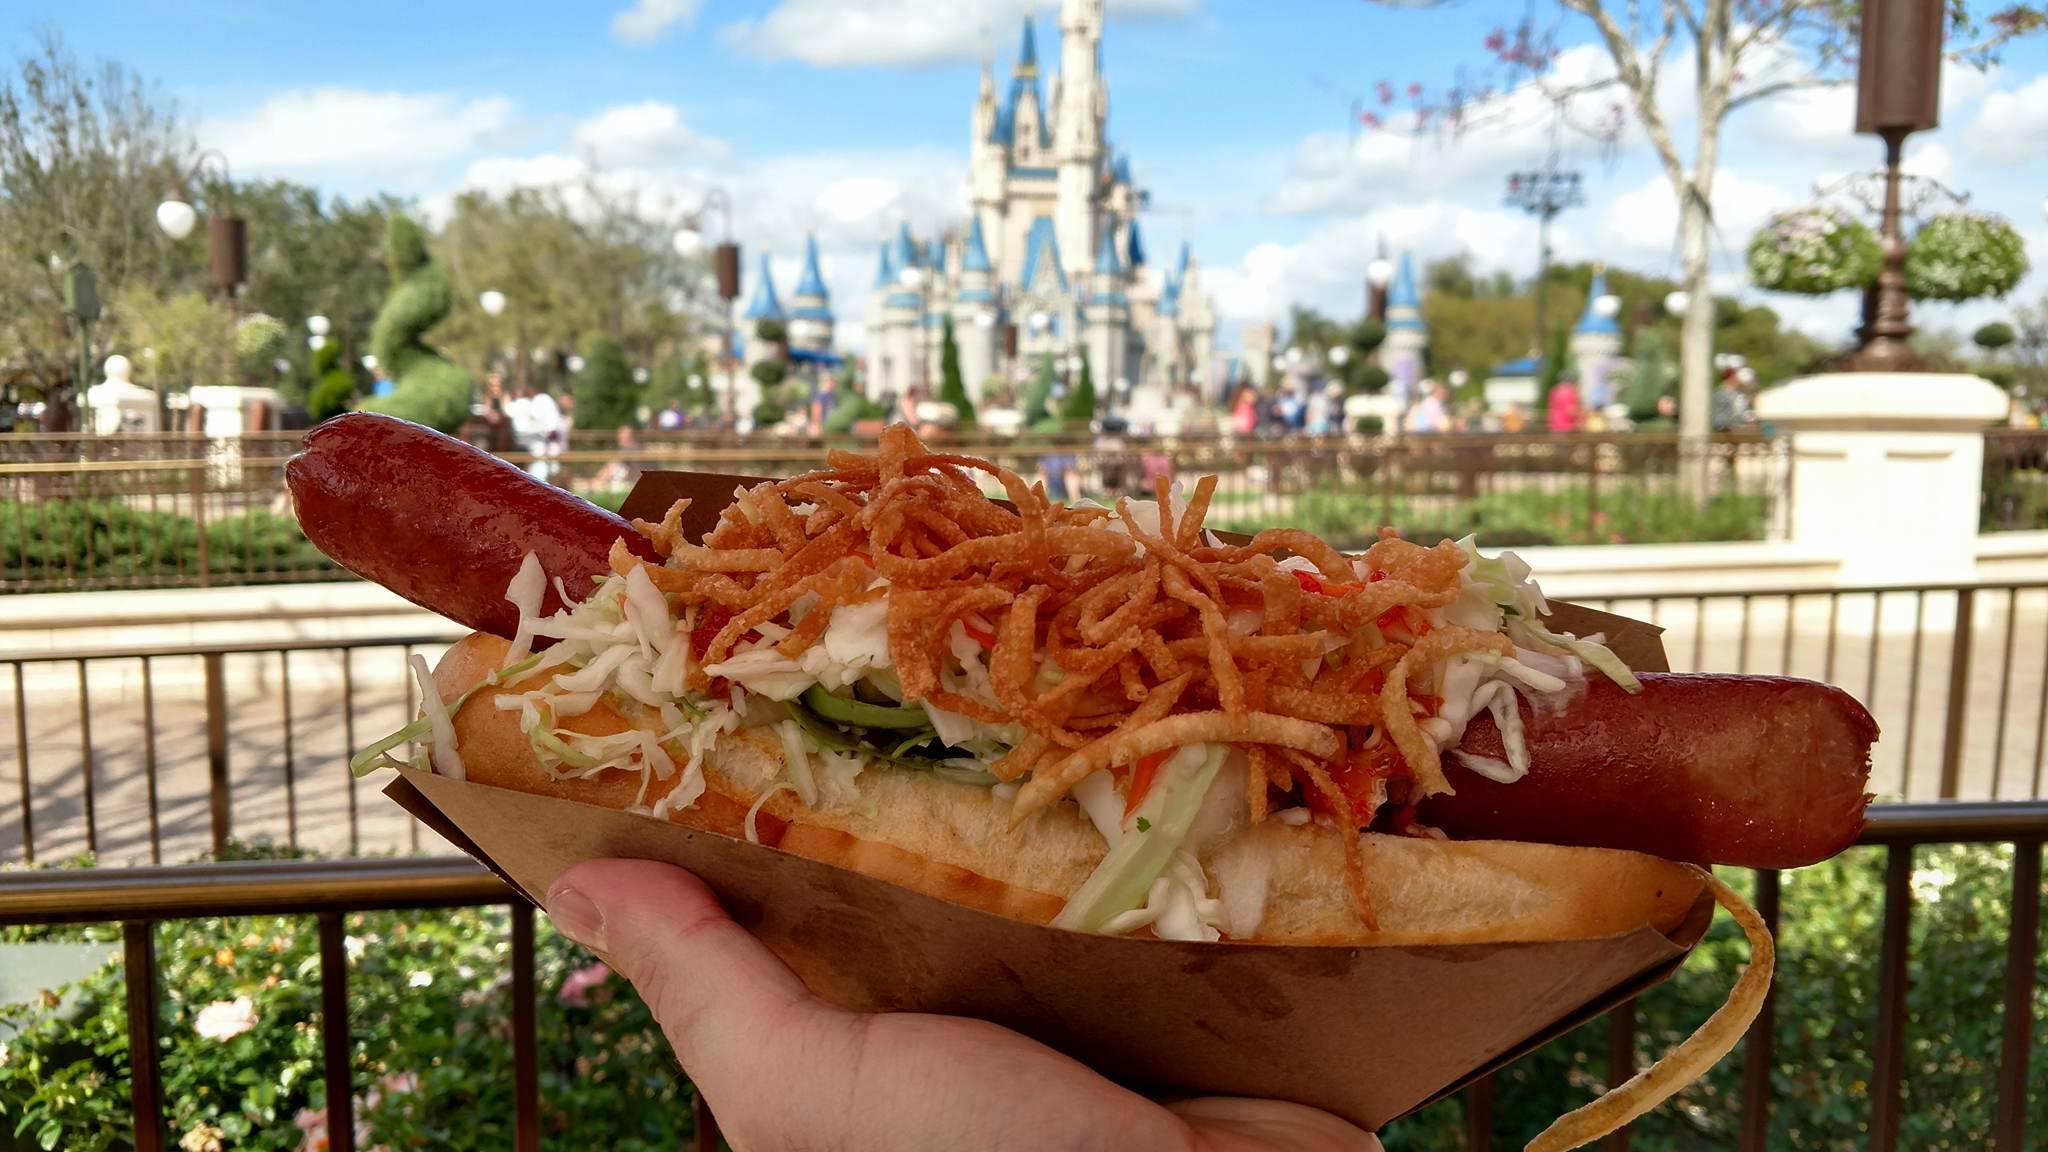 Casey’s Corner at Disney World’s Magic Kingdom Rings in March with Asian-inspired Hot Dog